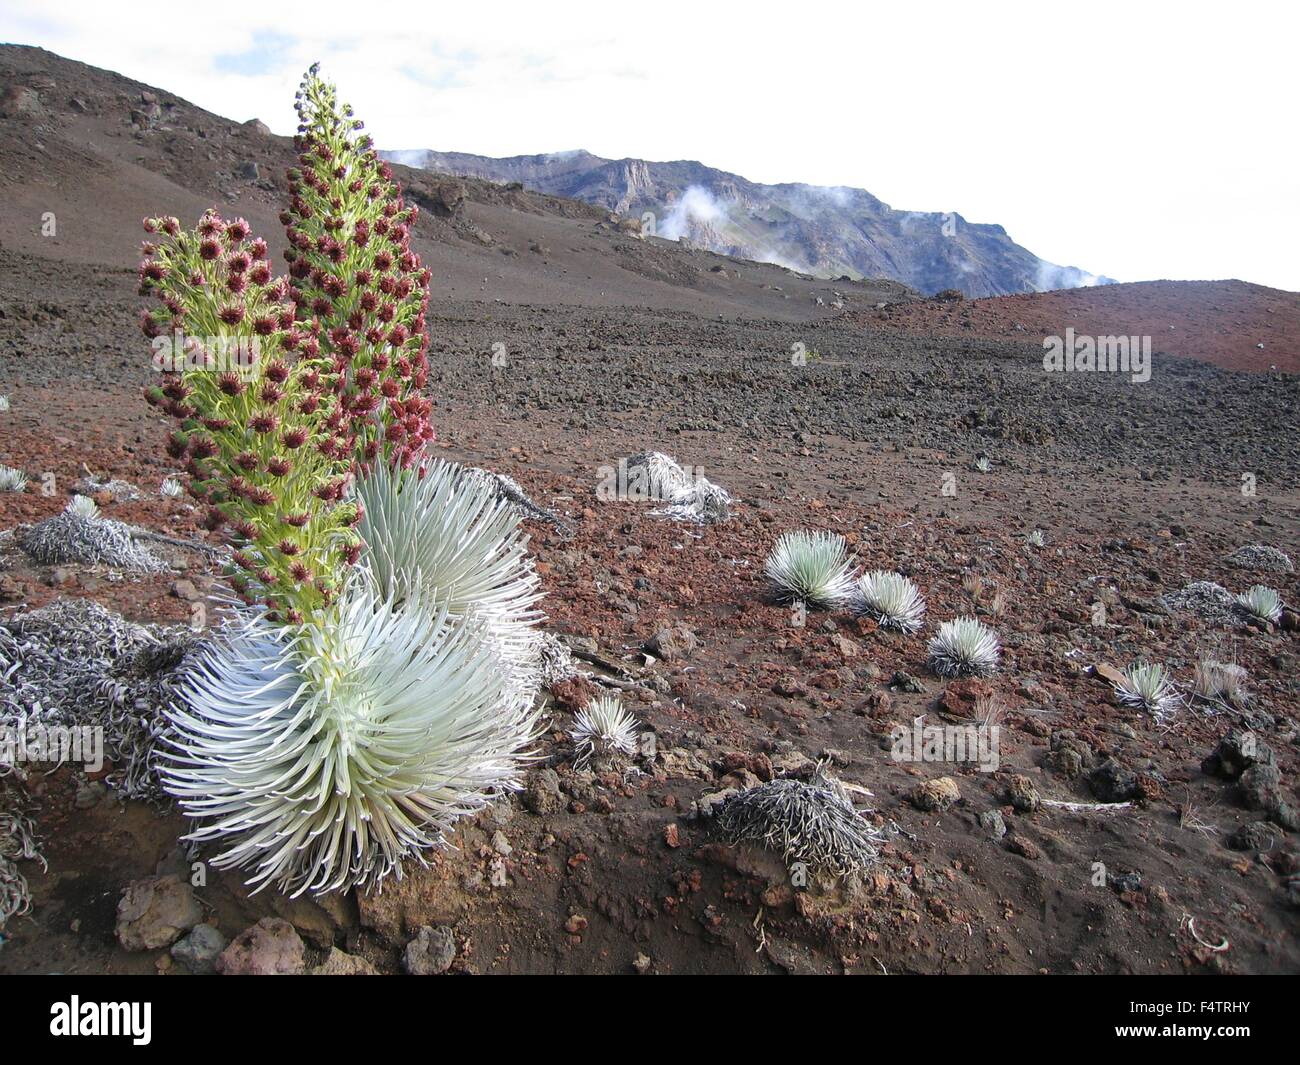 A Haleakala silverswords plant blooming in a desolate cinder field along the Sliding Sands Trail at the Haleakalā National Park, Hawaii. The silversword is an endangered species that is found only within Haleakalā National Park on the cinder slopes of Haleakalā Crater. Stock Photo